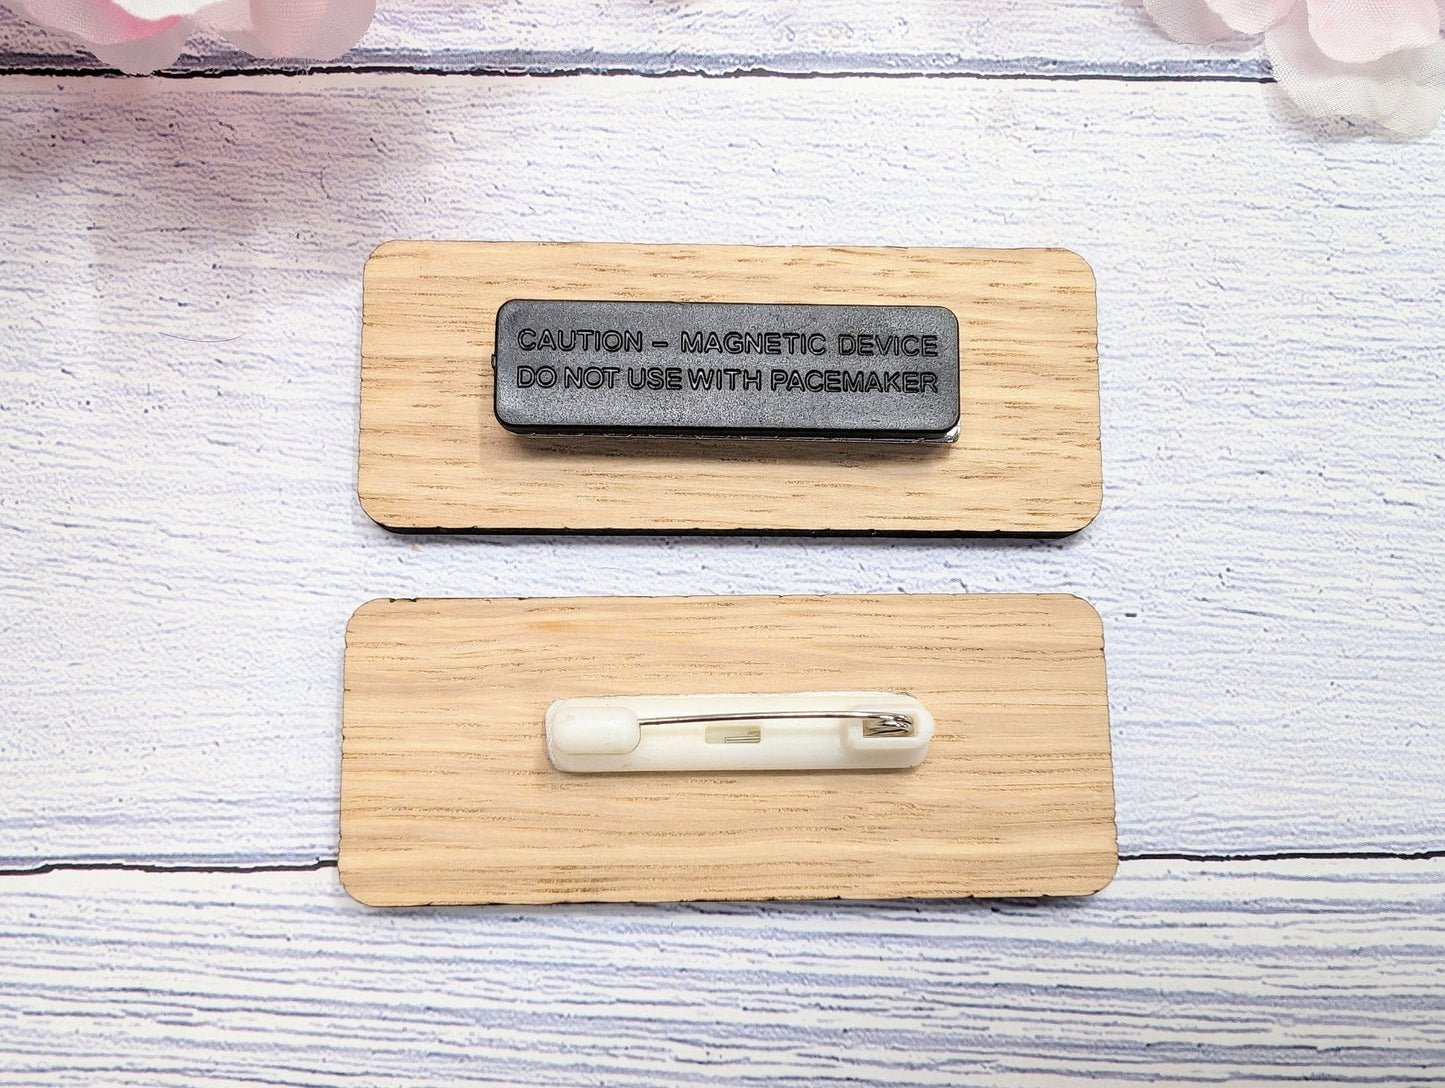 Custom Pronoun Oak Name Badges - Inclusive & Personal, Pin/Magnet | Eco-Friendly, 75x30mm, He/She/They - Respectful Workplace Accessory - CherryGroveCraft